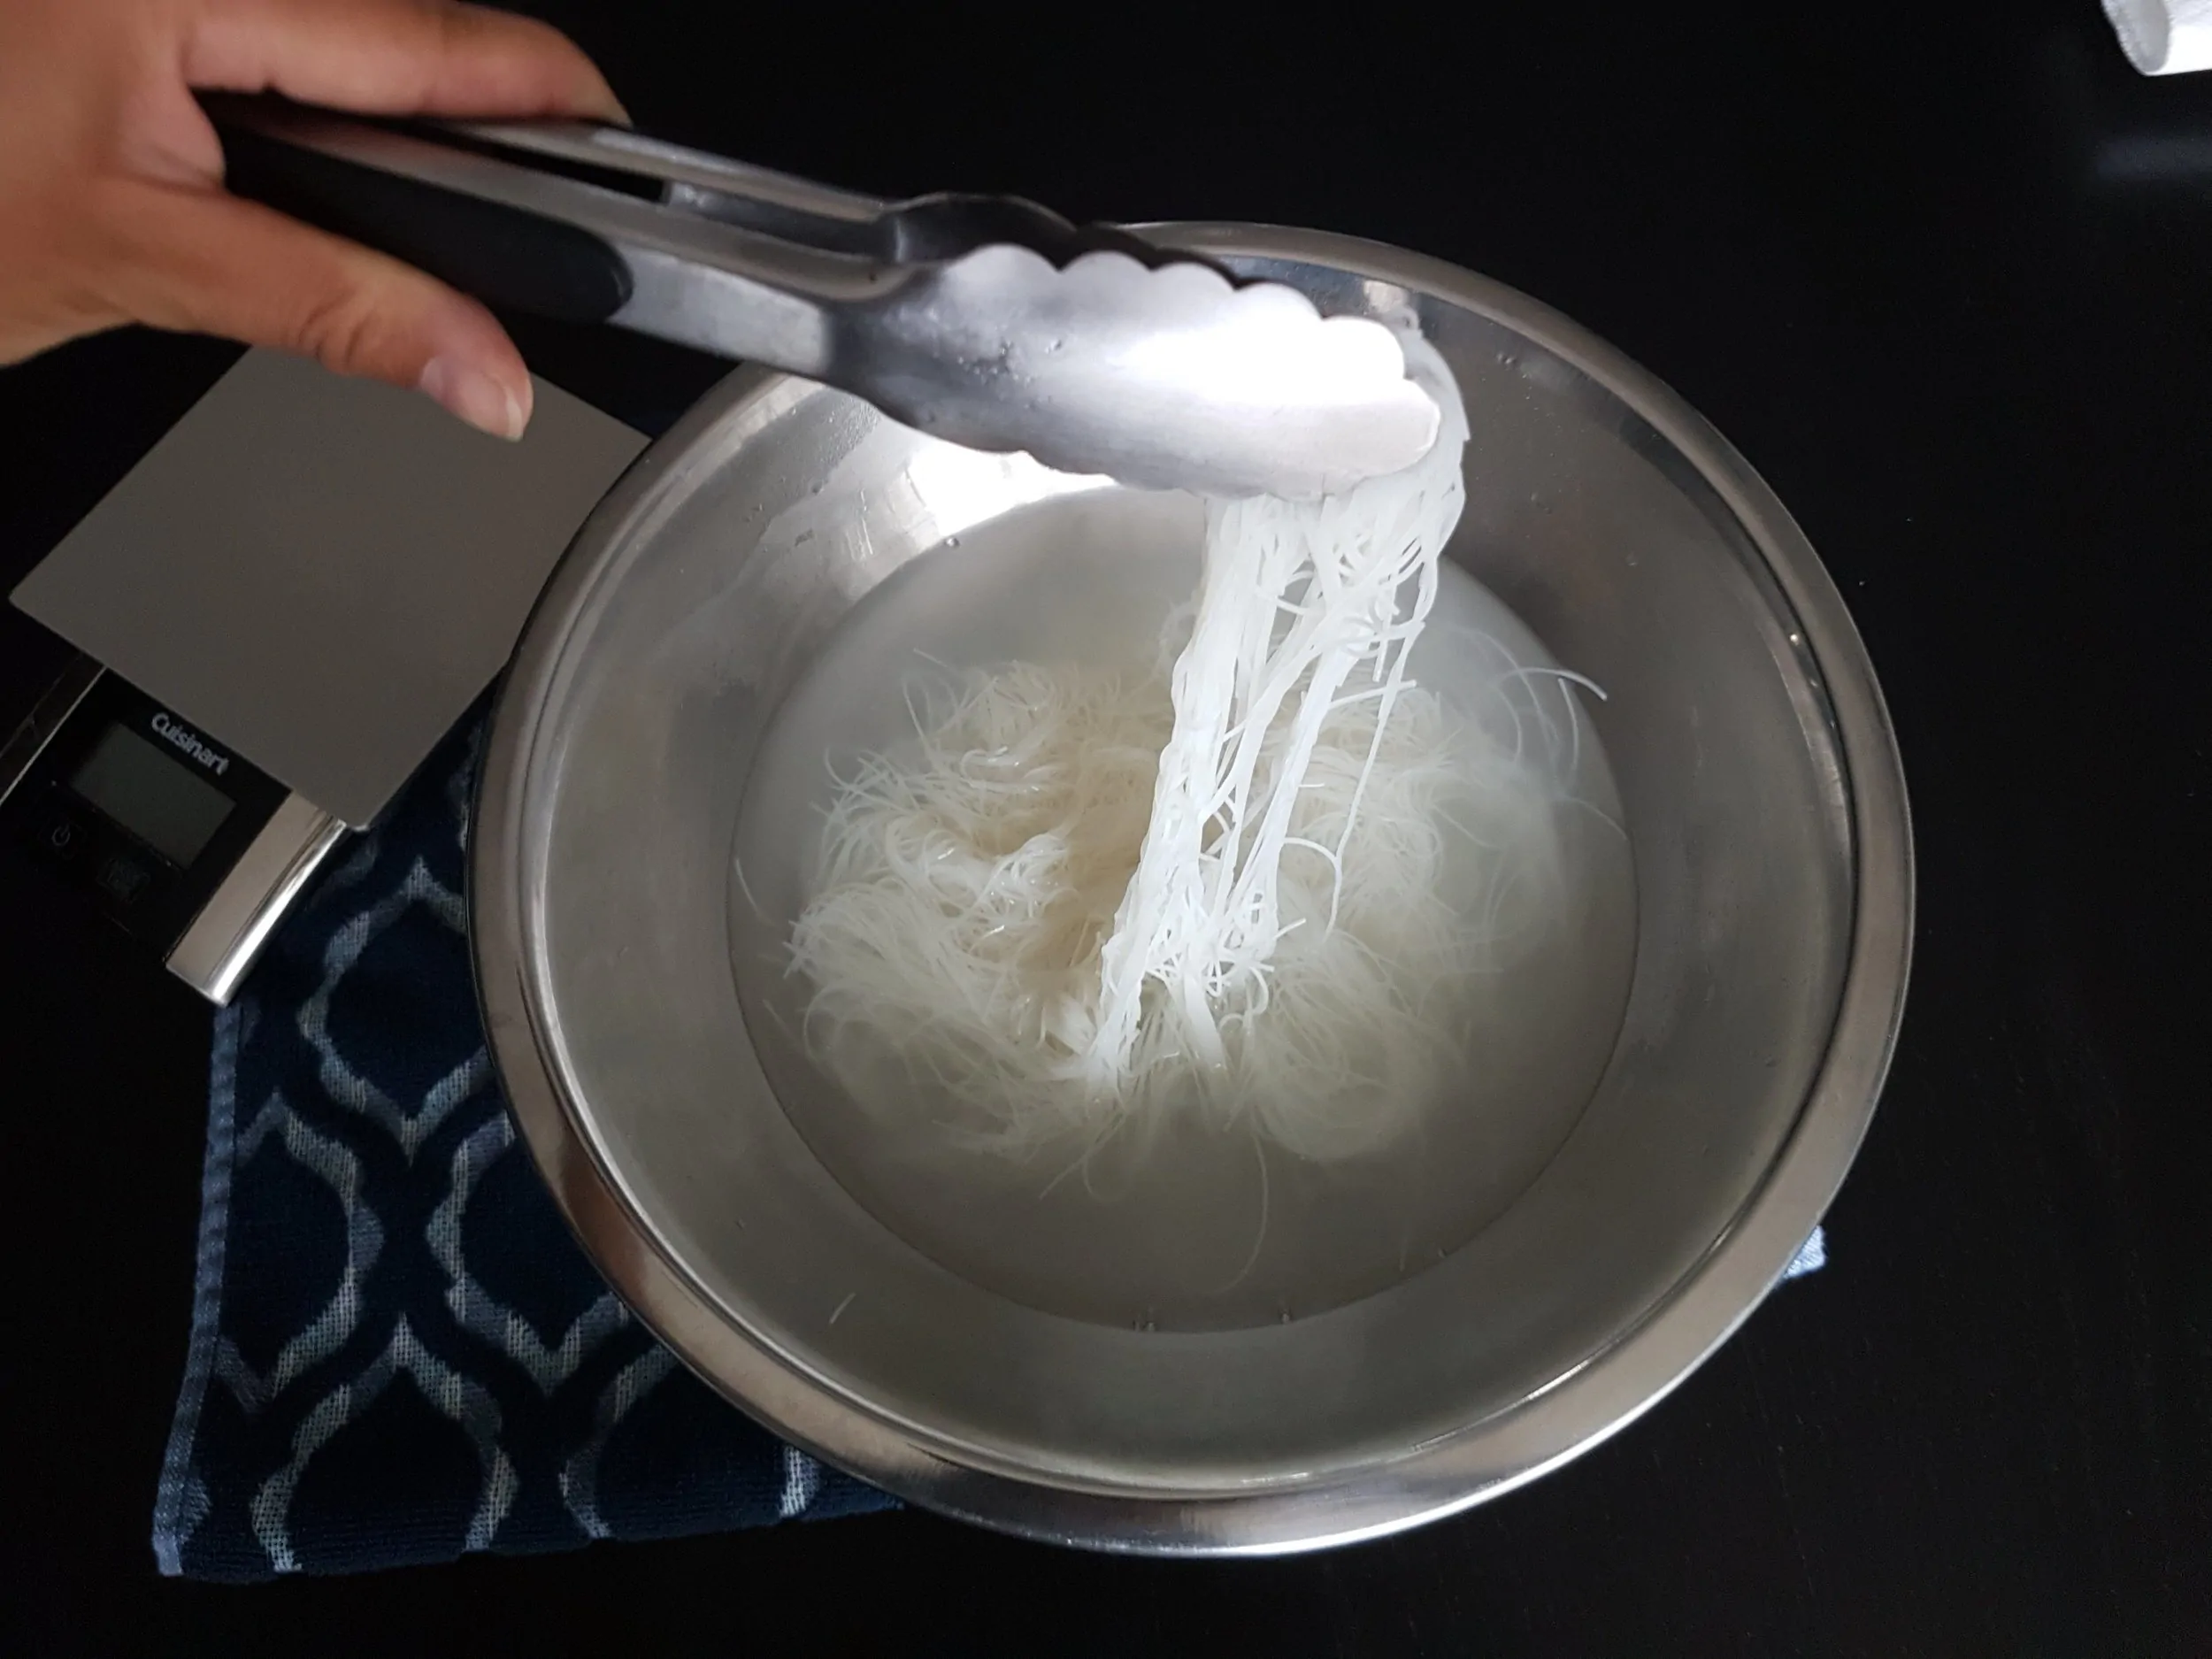 Thin rice noodles being soaked in a bowl.